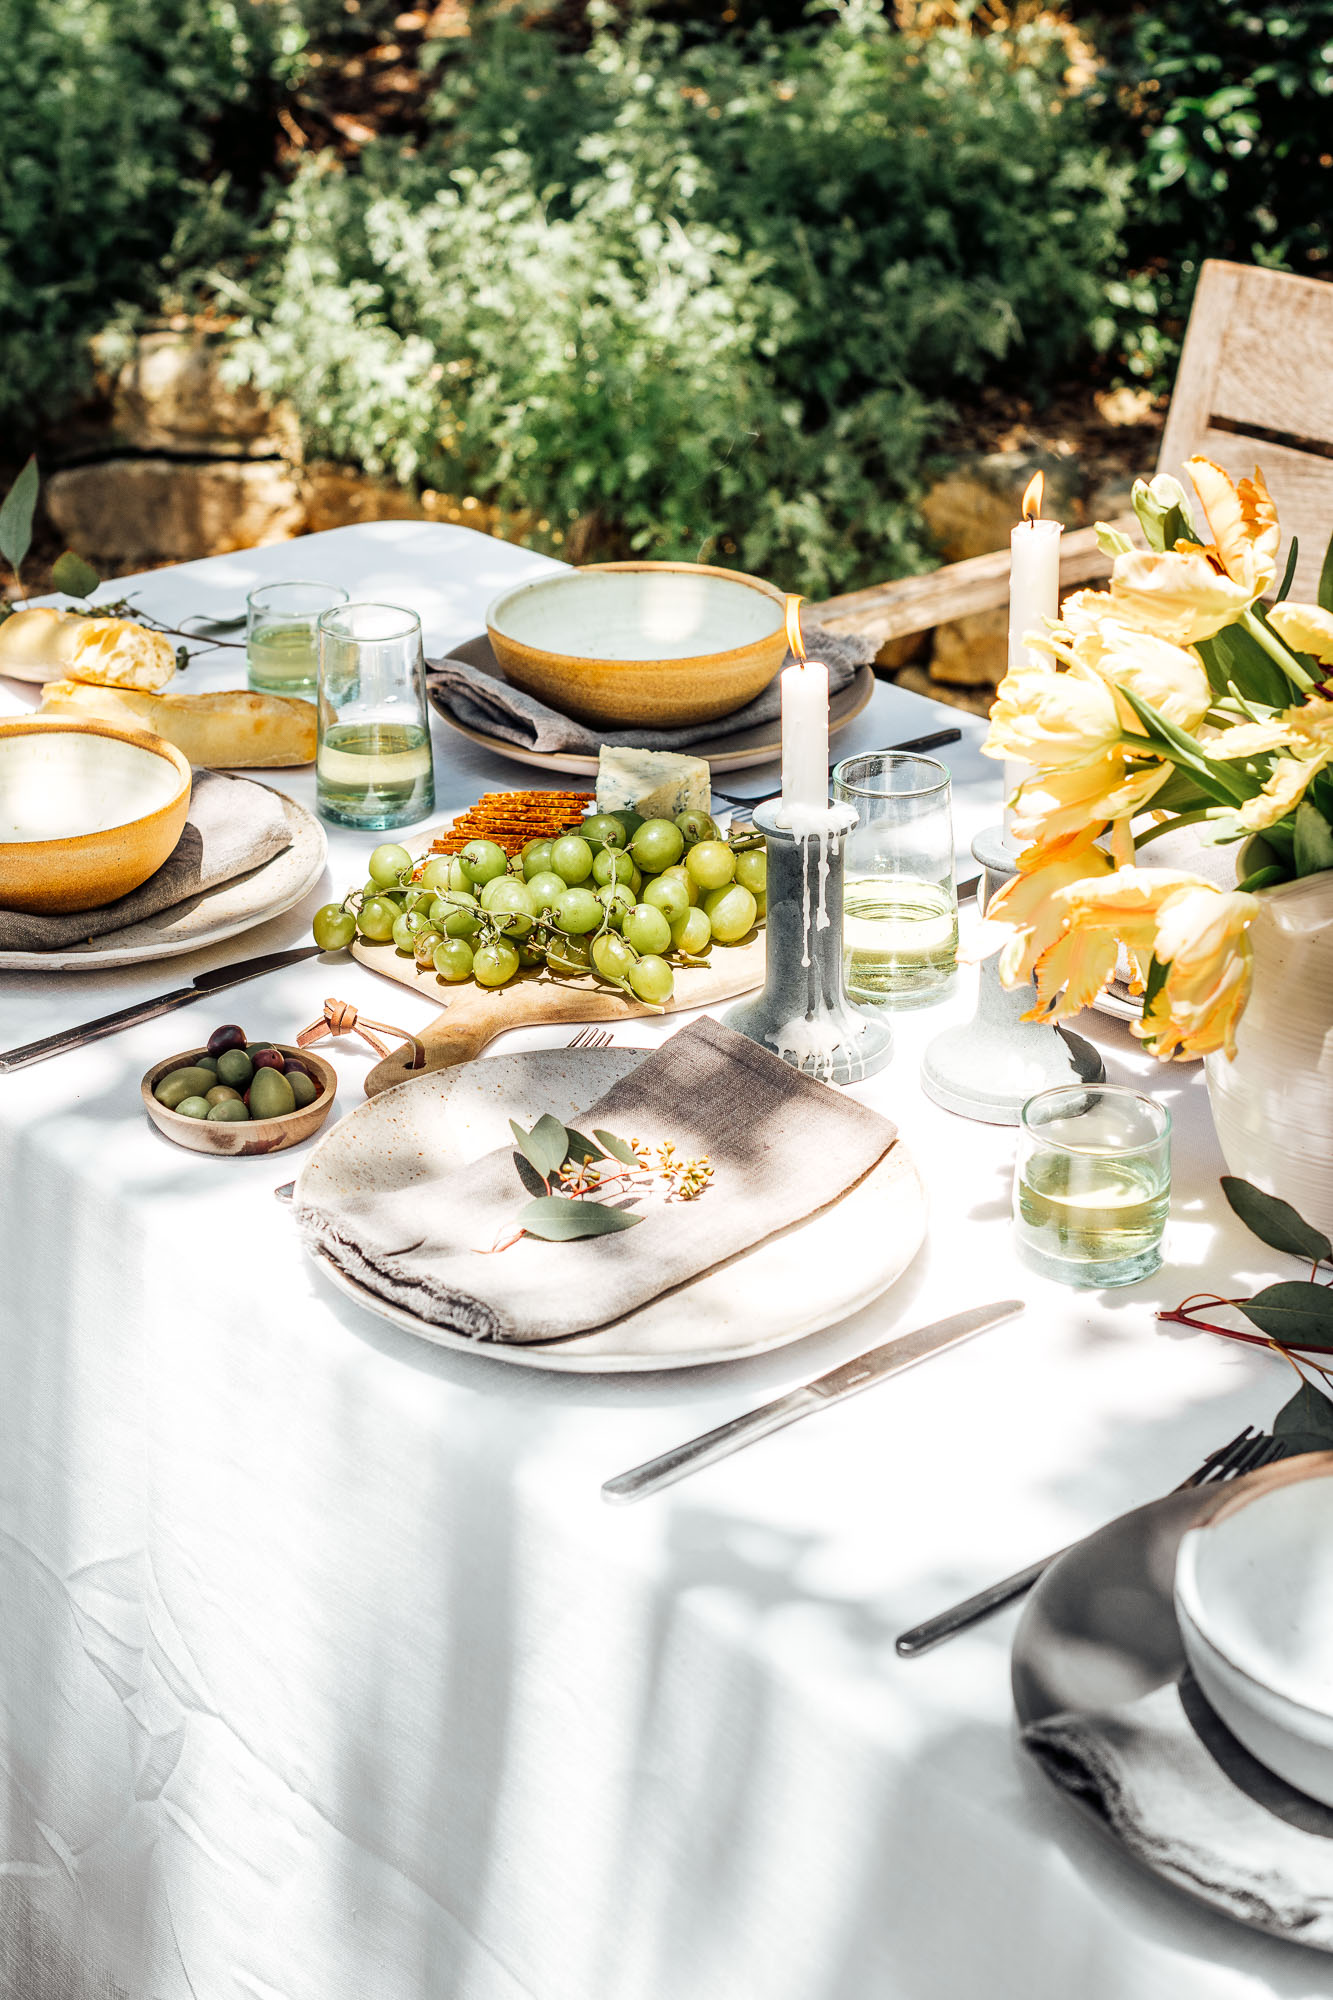 summer table setting ideas, Camille Styles summer dinner party table in backyard with trees, grapes and candlesticks, spring flowers